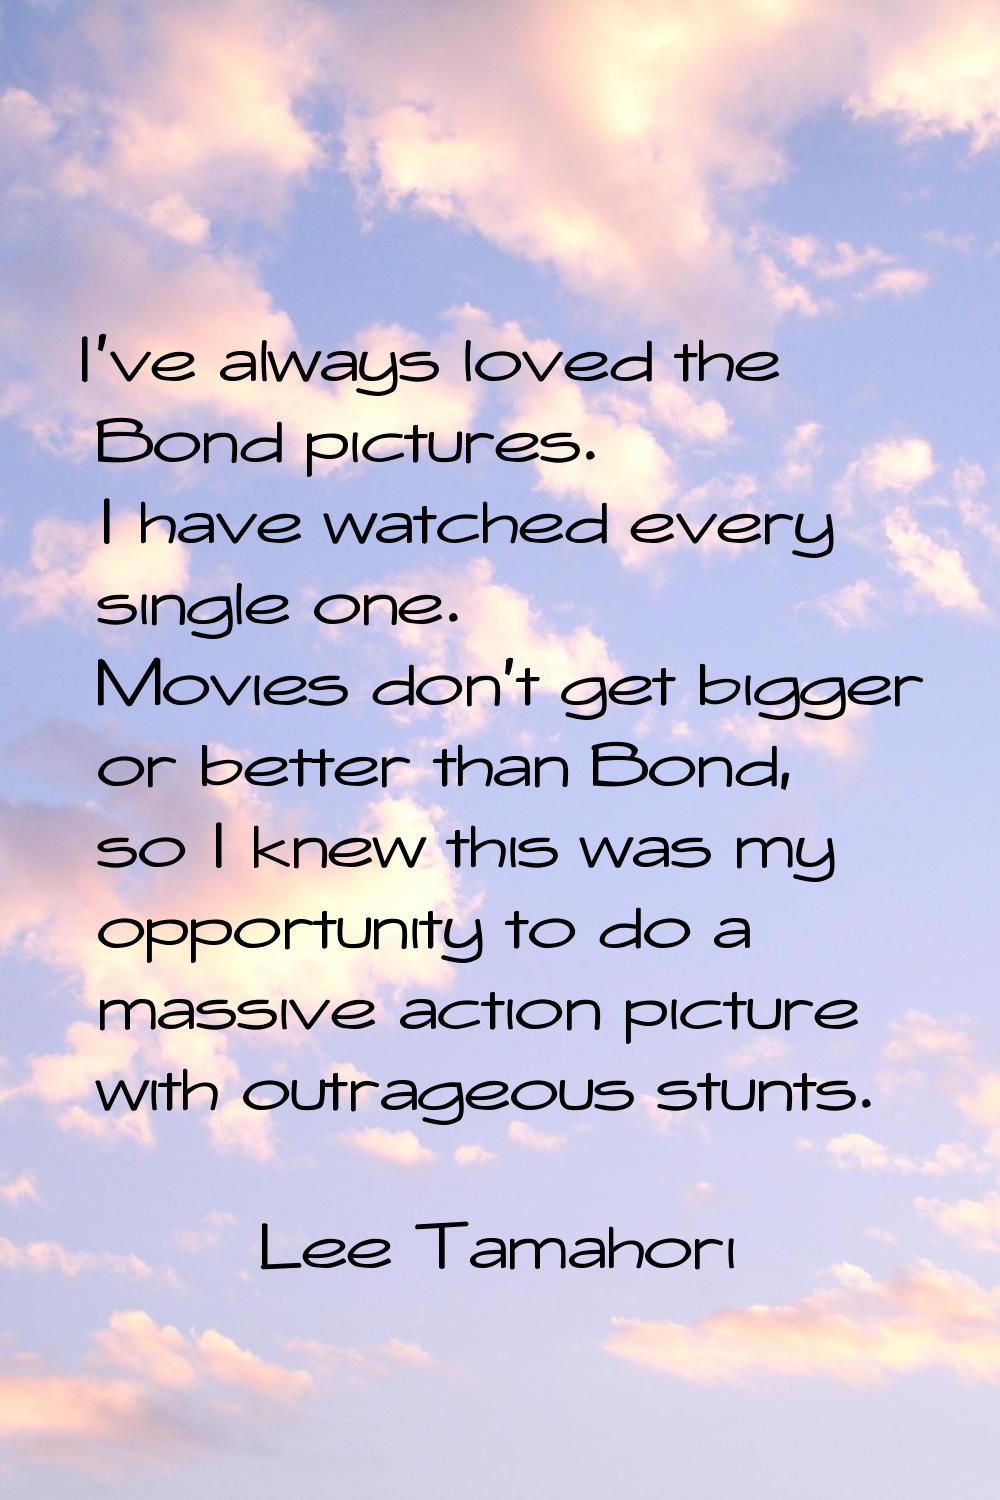 I've always loved the Bond pictures. I have watched every single one. Movies don't get bigger or be